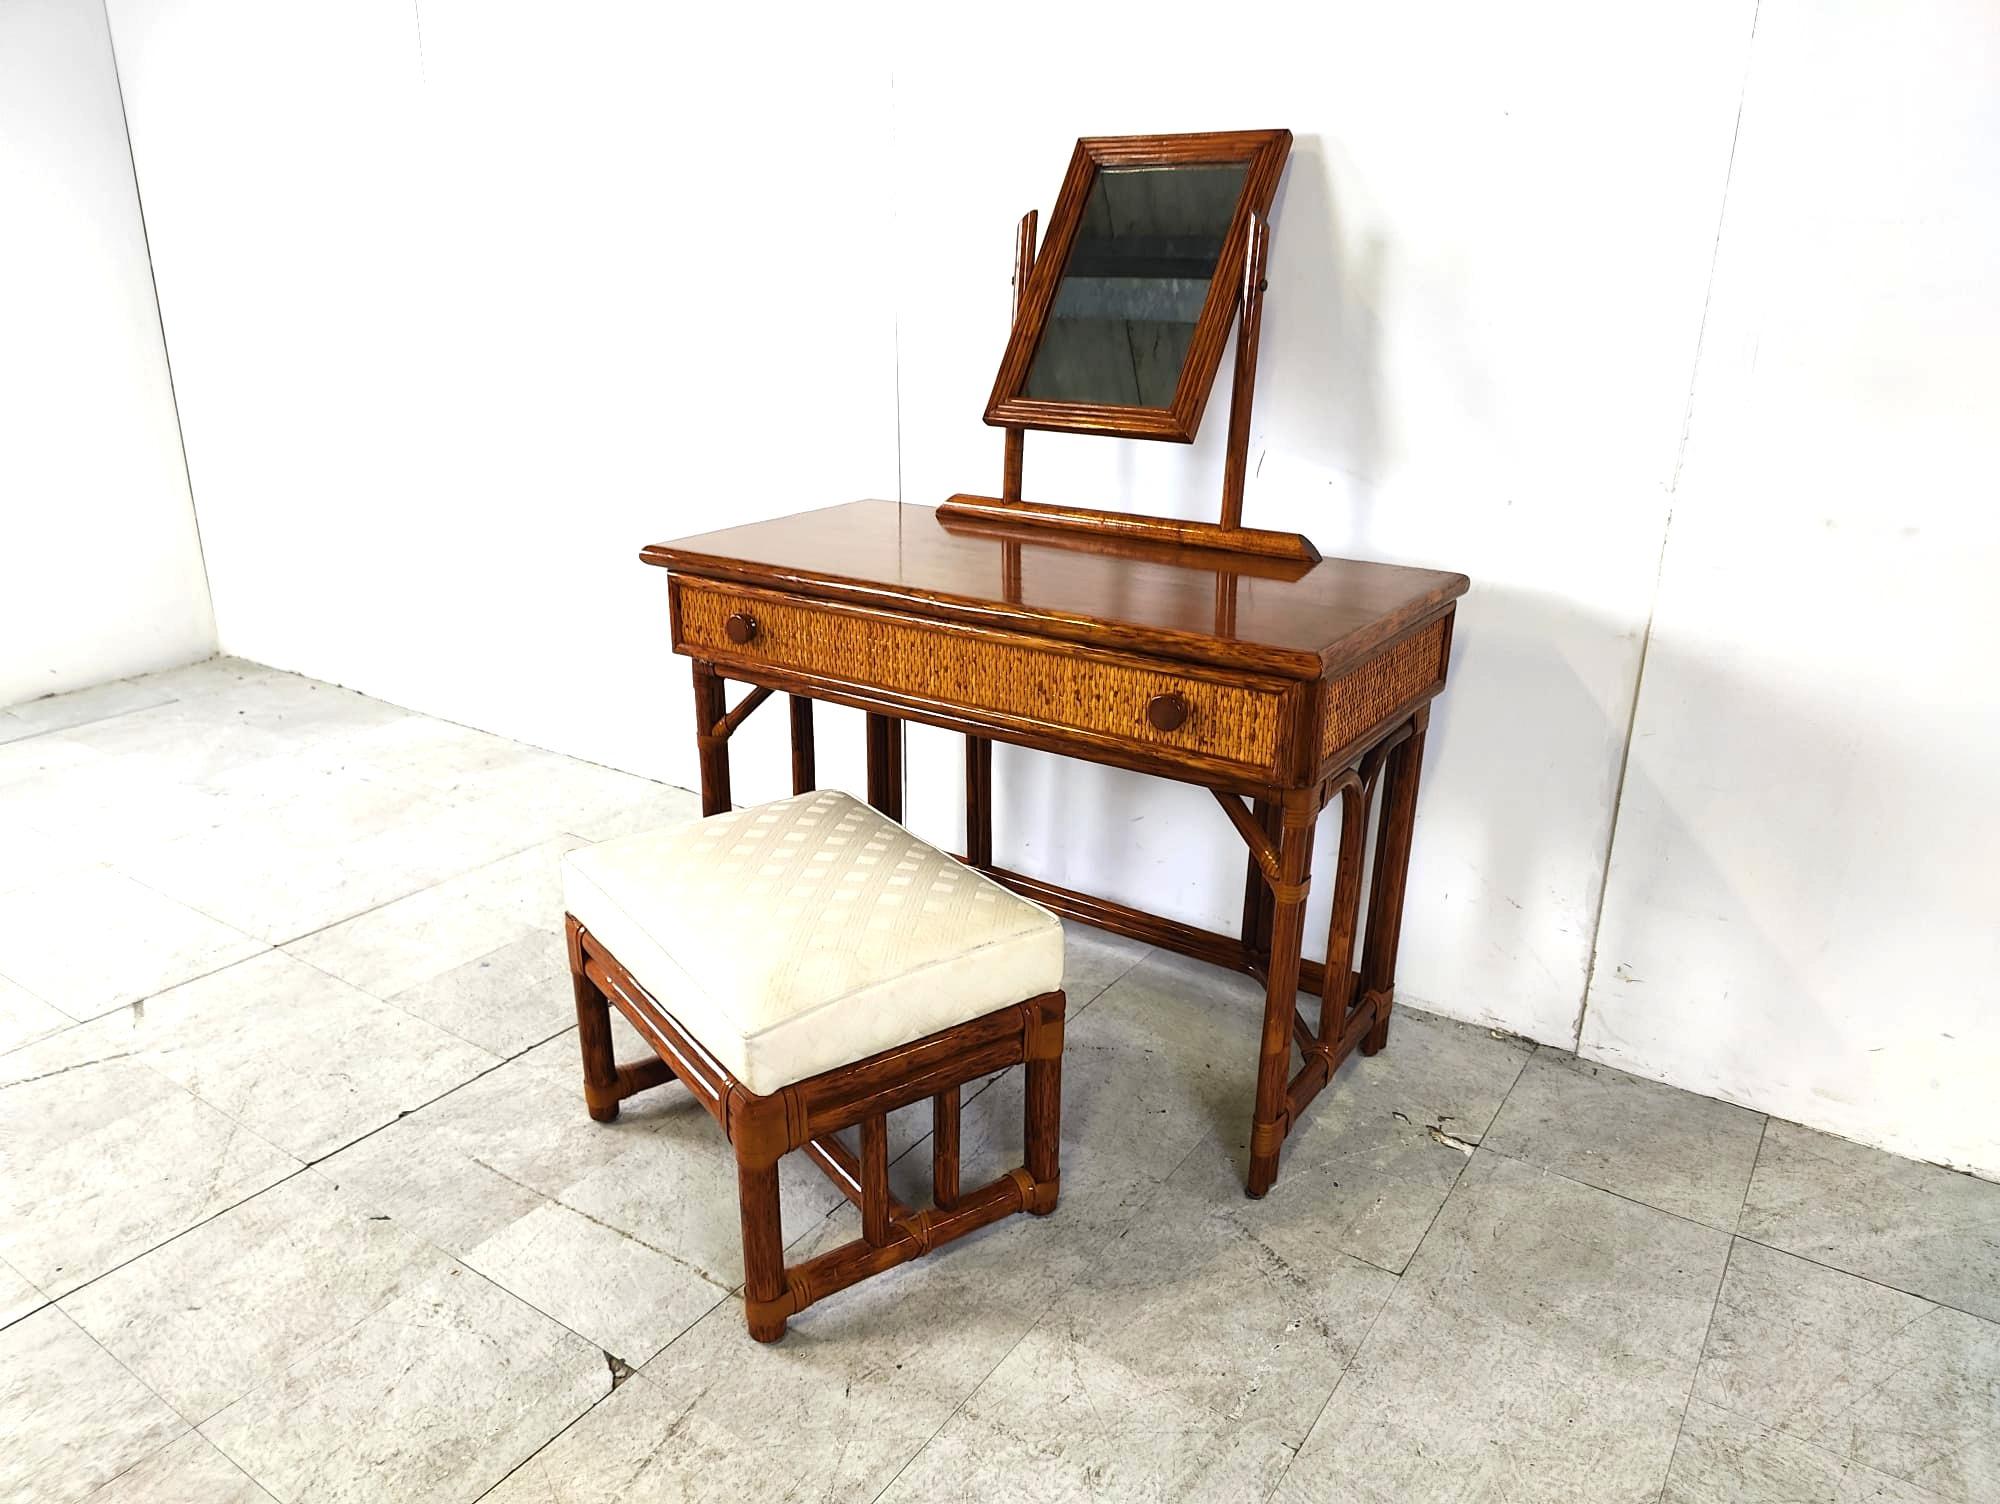 Vintage vanity table by Maugrion made from bamboo and rattan with a mirror and large drawer.

Comes with stool

High quality and elegant vintage furniture piece which will add a touch of charm to your bedroom.

1970s - France

Very good